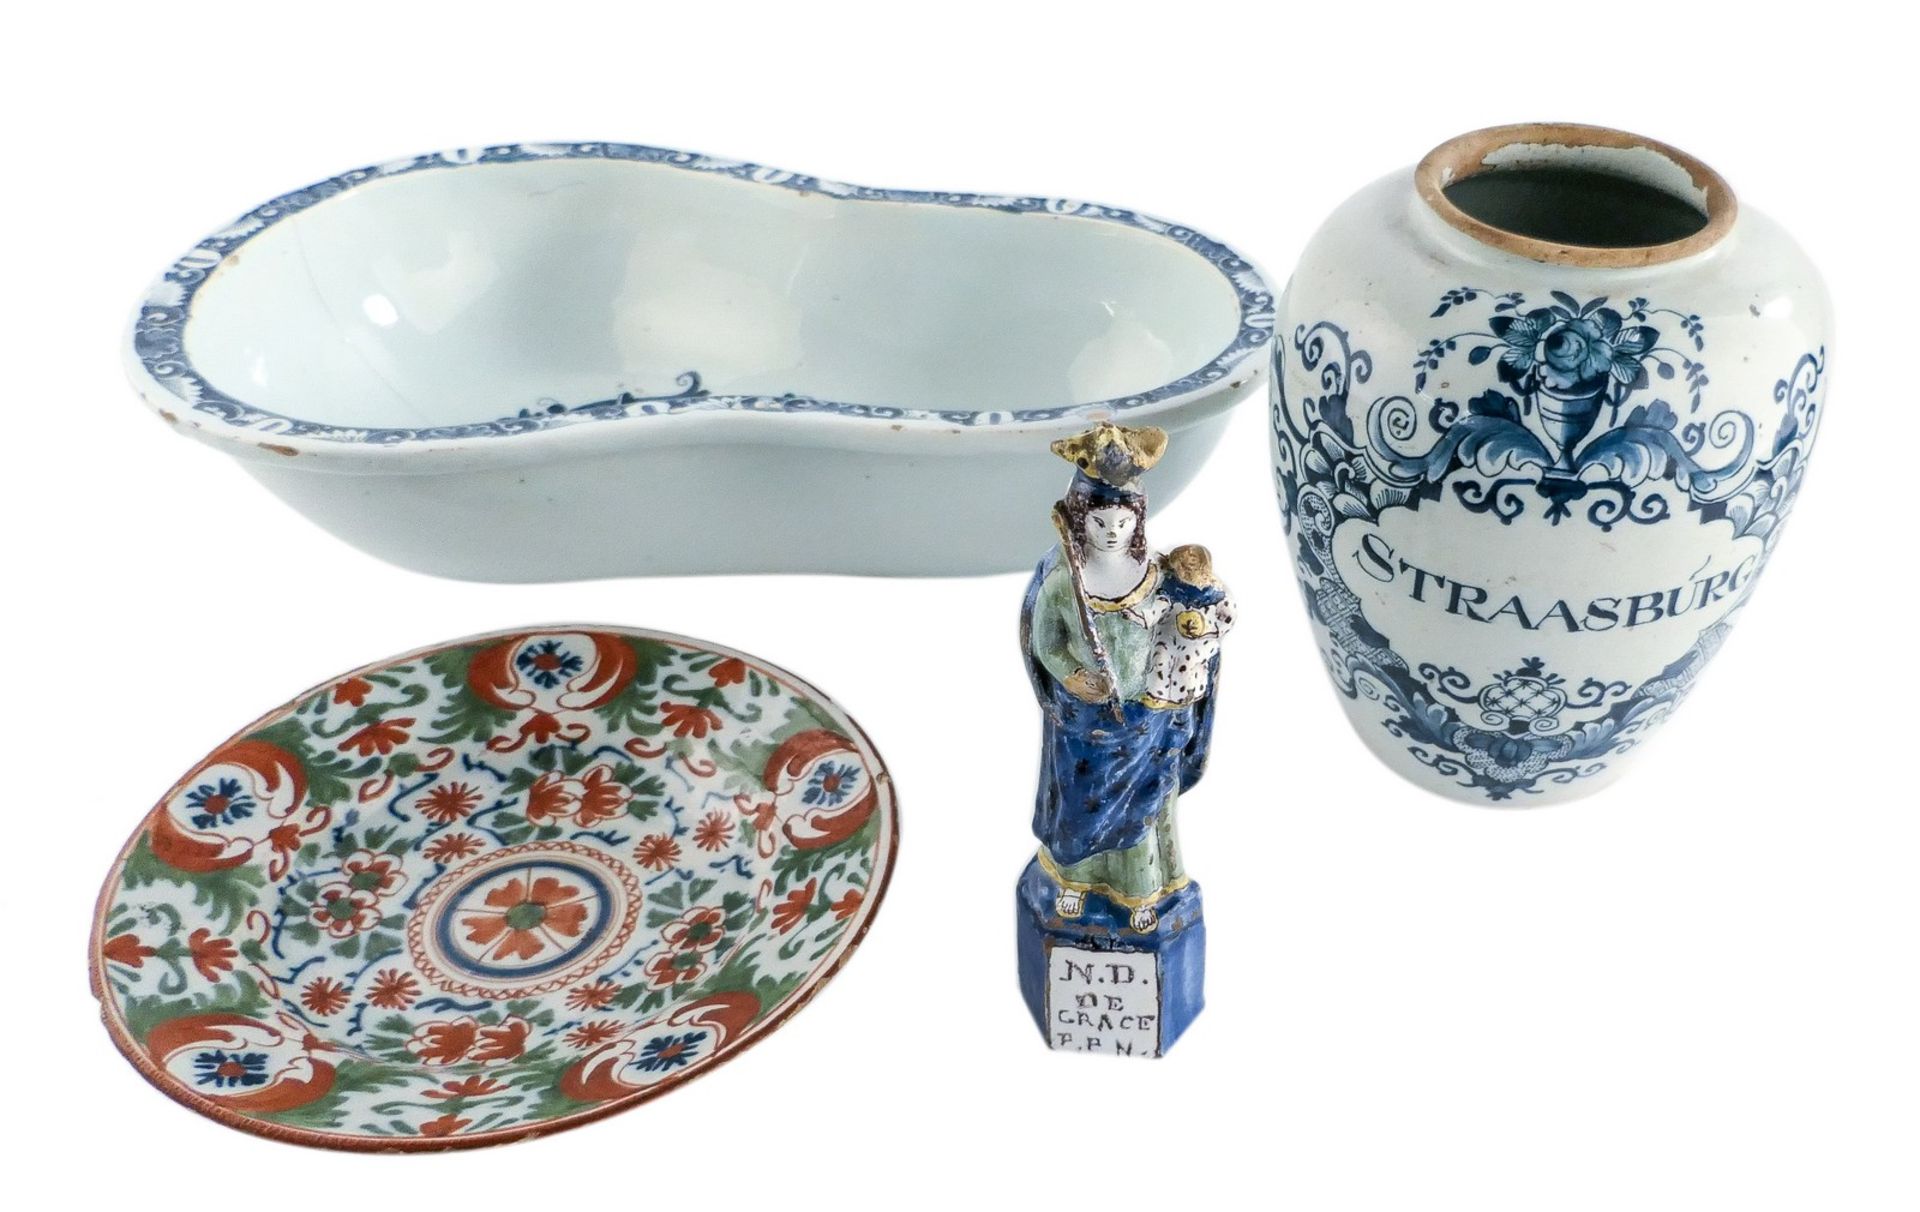 A French blue and white decorated earthenware bidet, probably Rouen, 18thC, H 43,5 - B 28,5 cm (